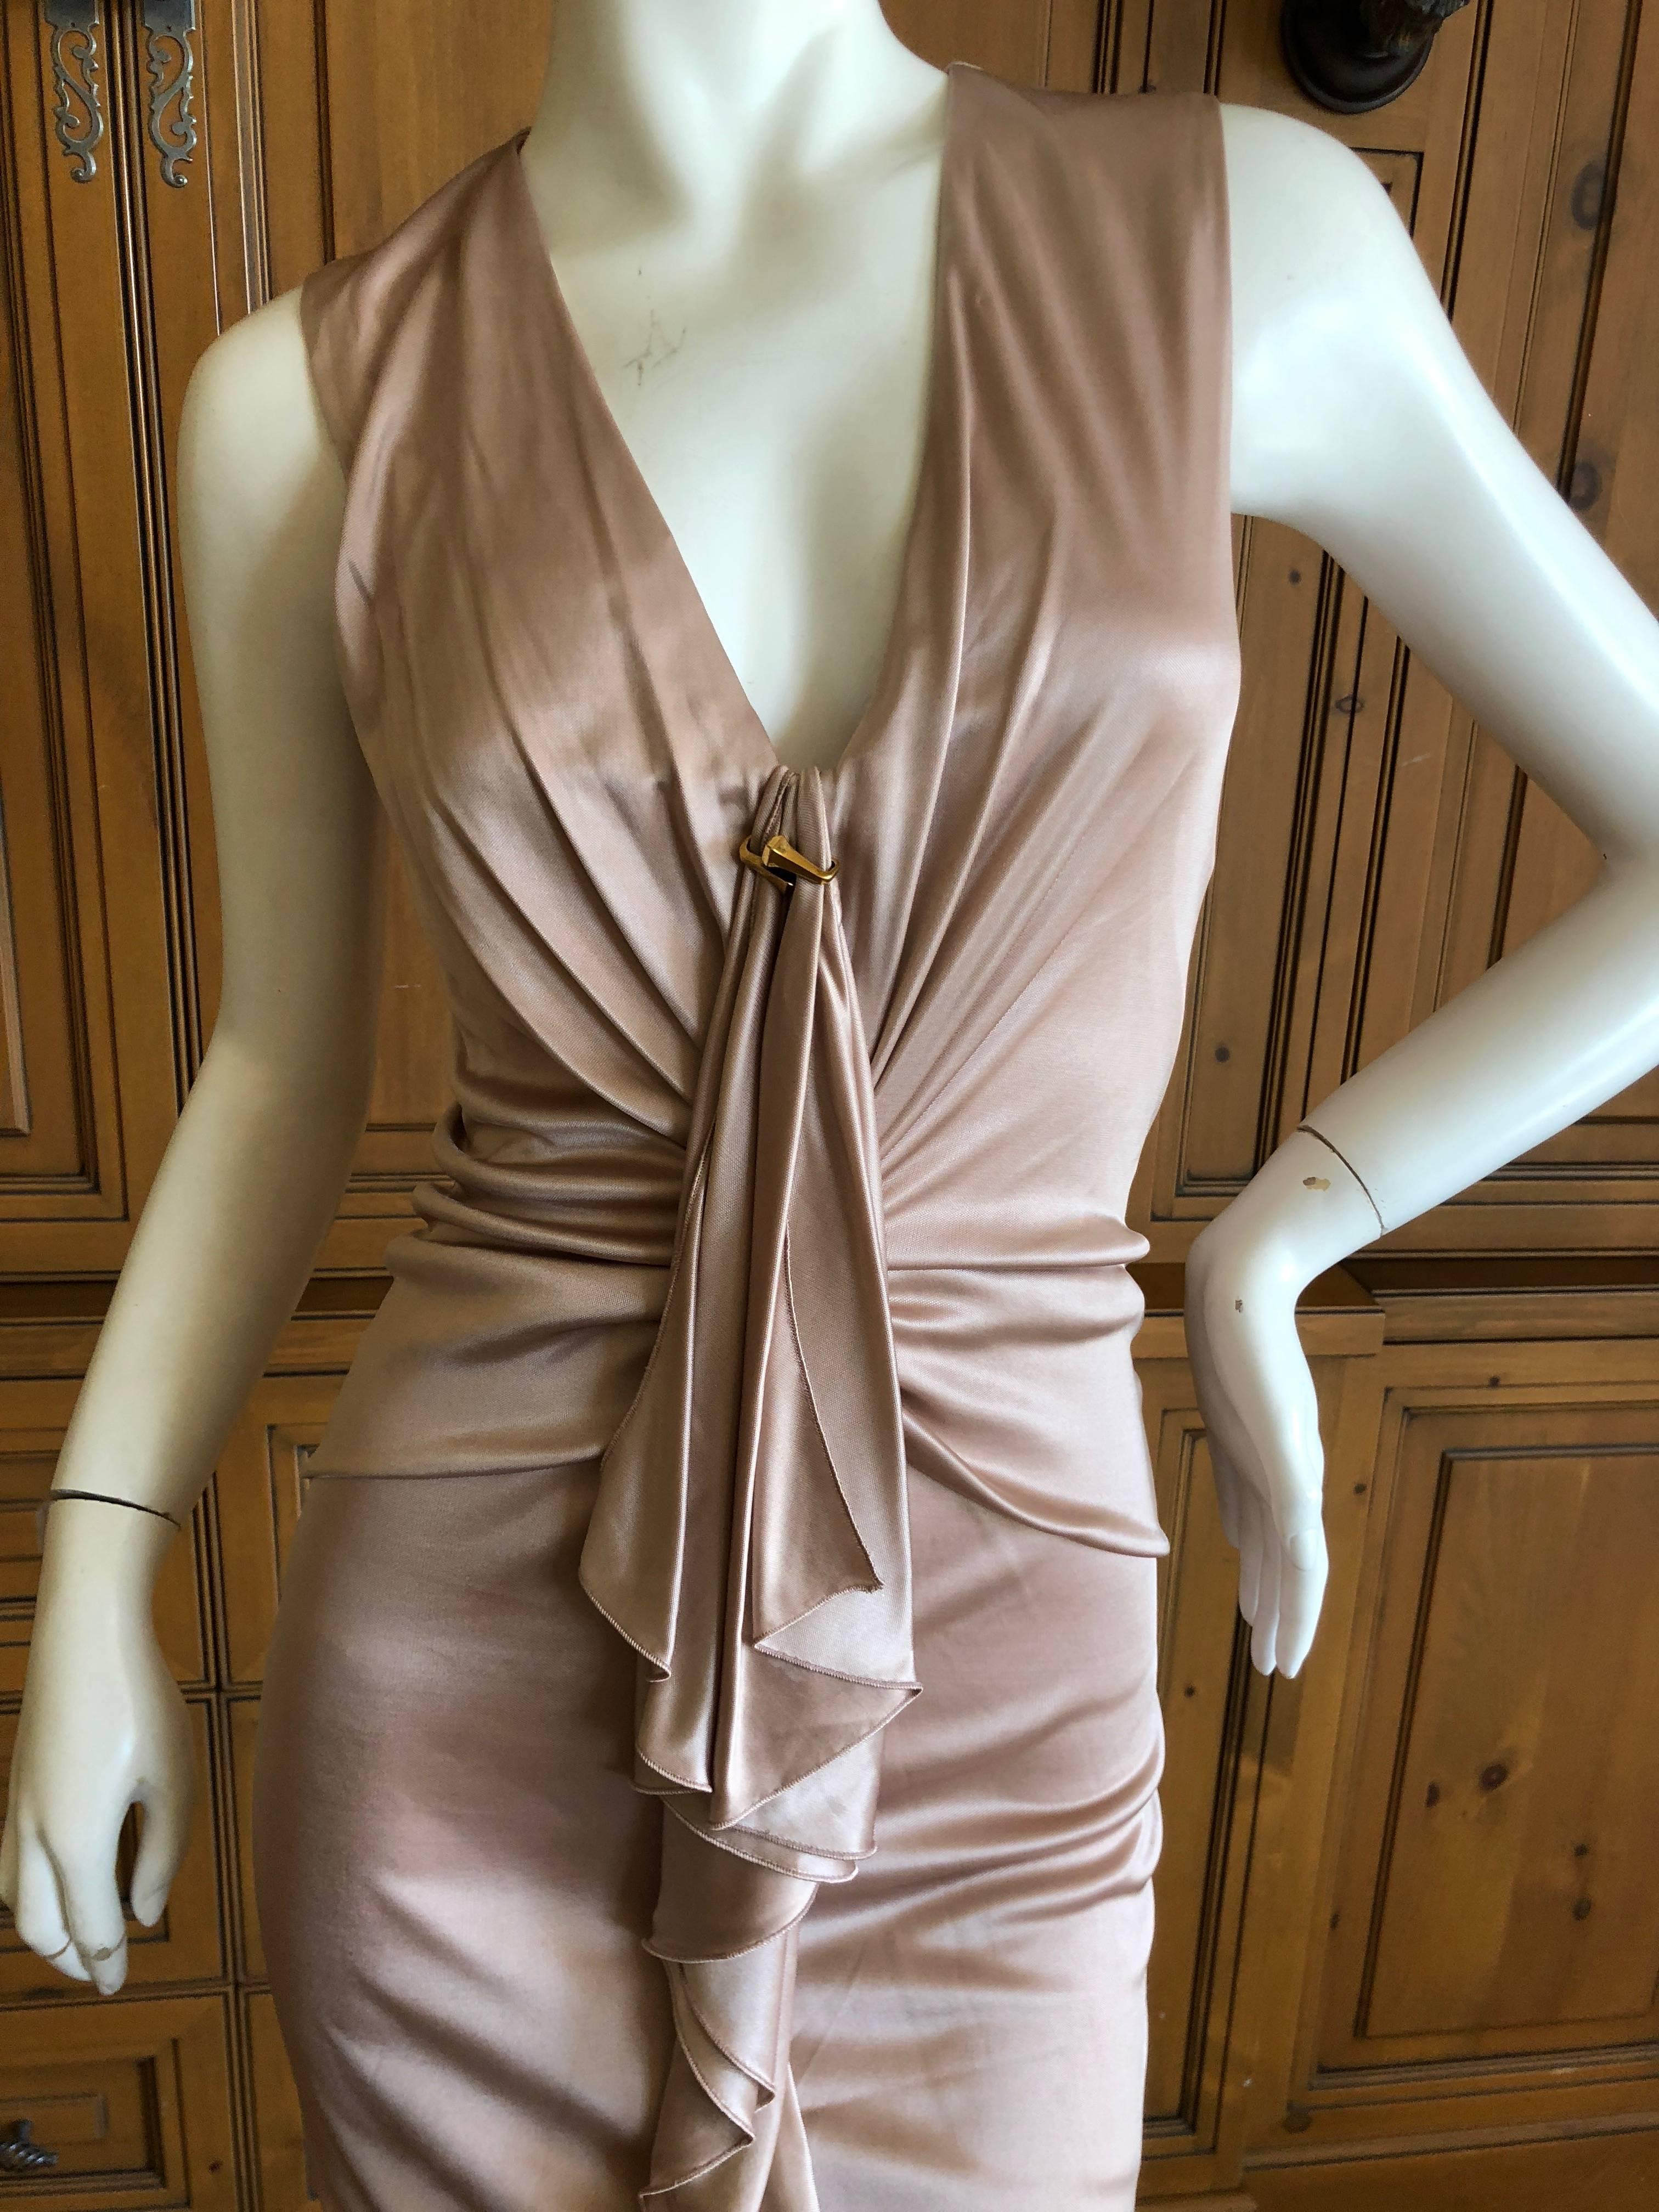 Gucci by Tom Ford Rose Gold Gathered Sleeveless Cocktail Dress For Sale 2